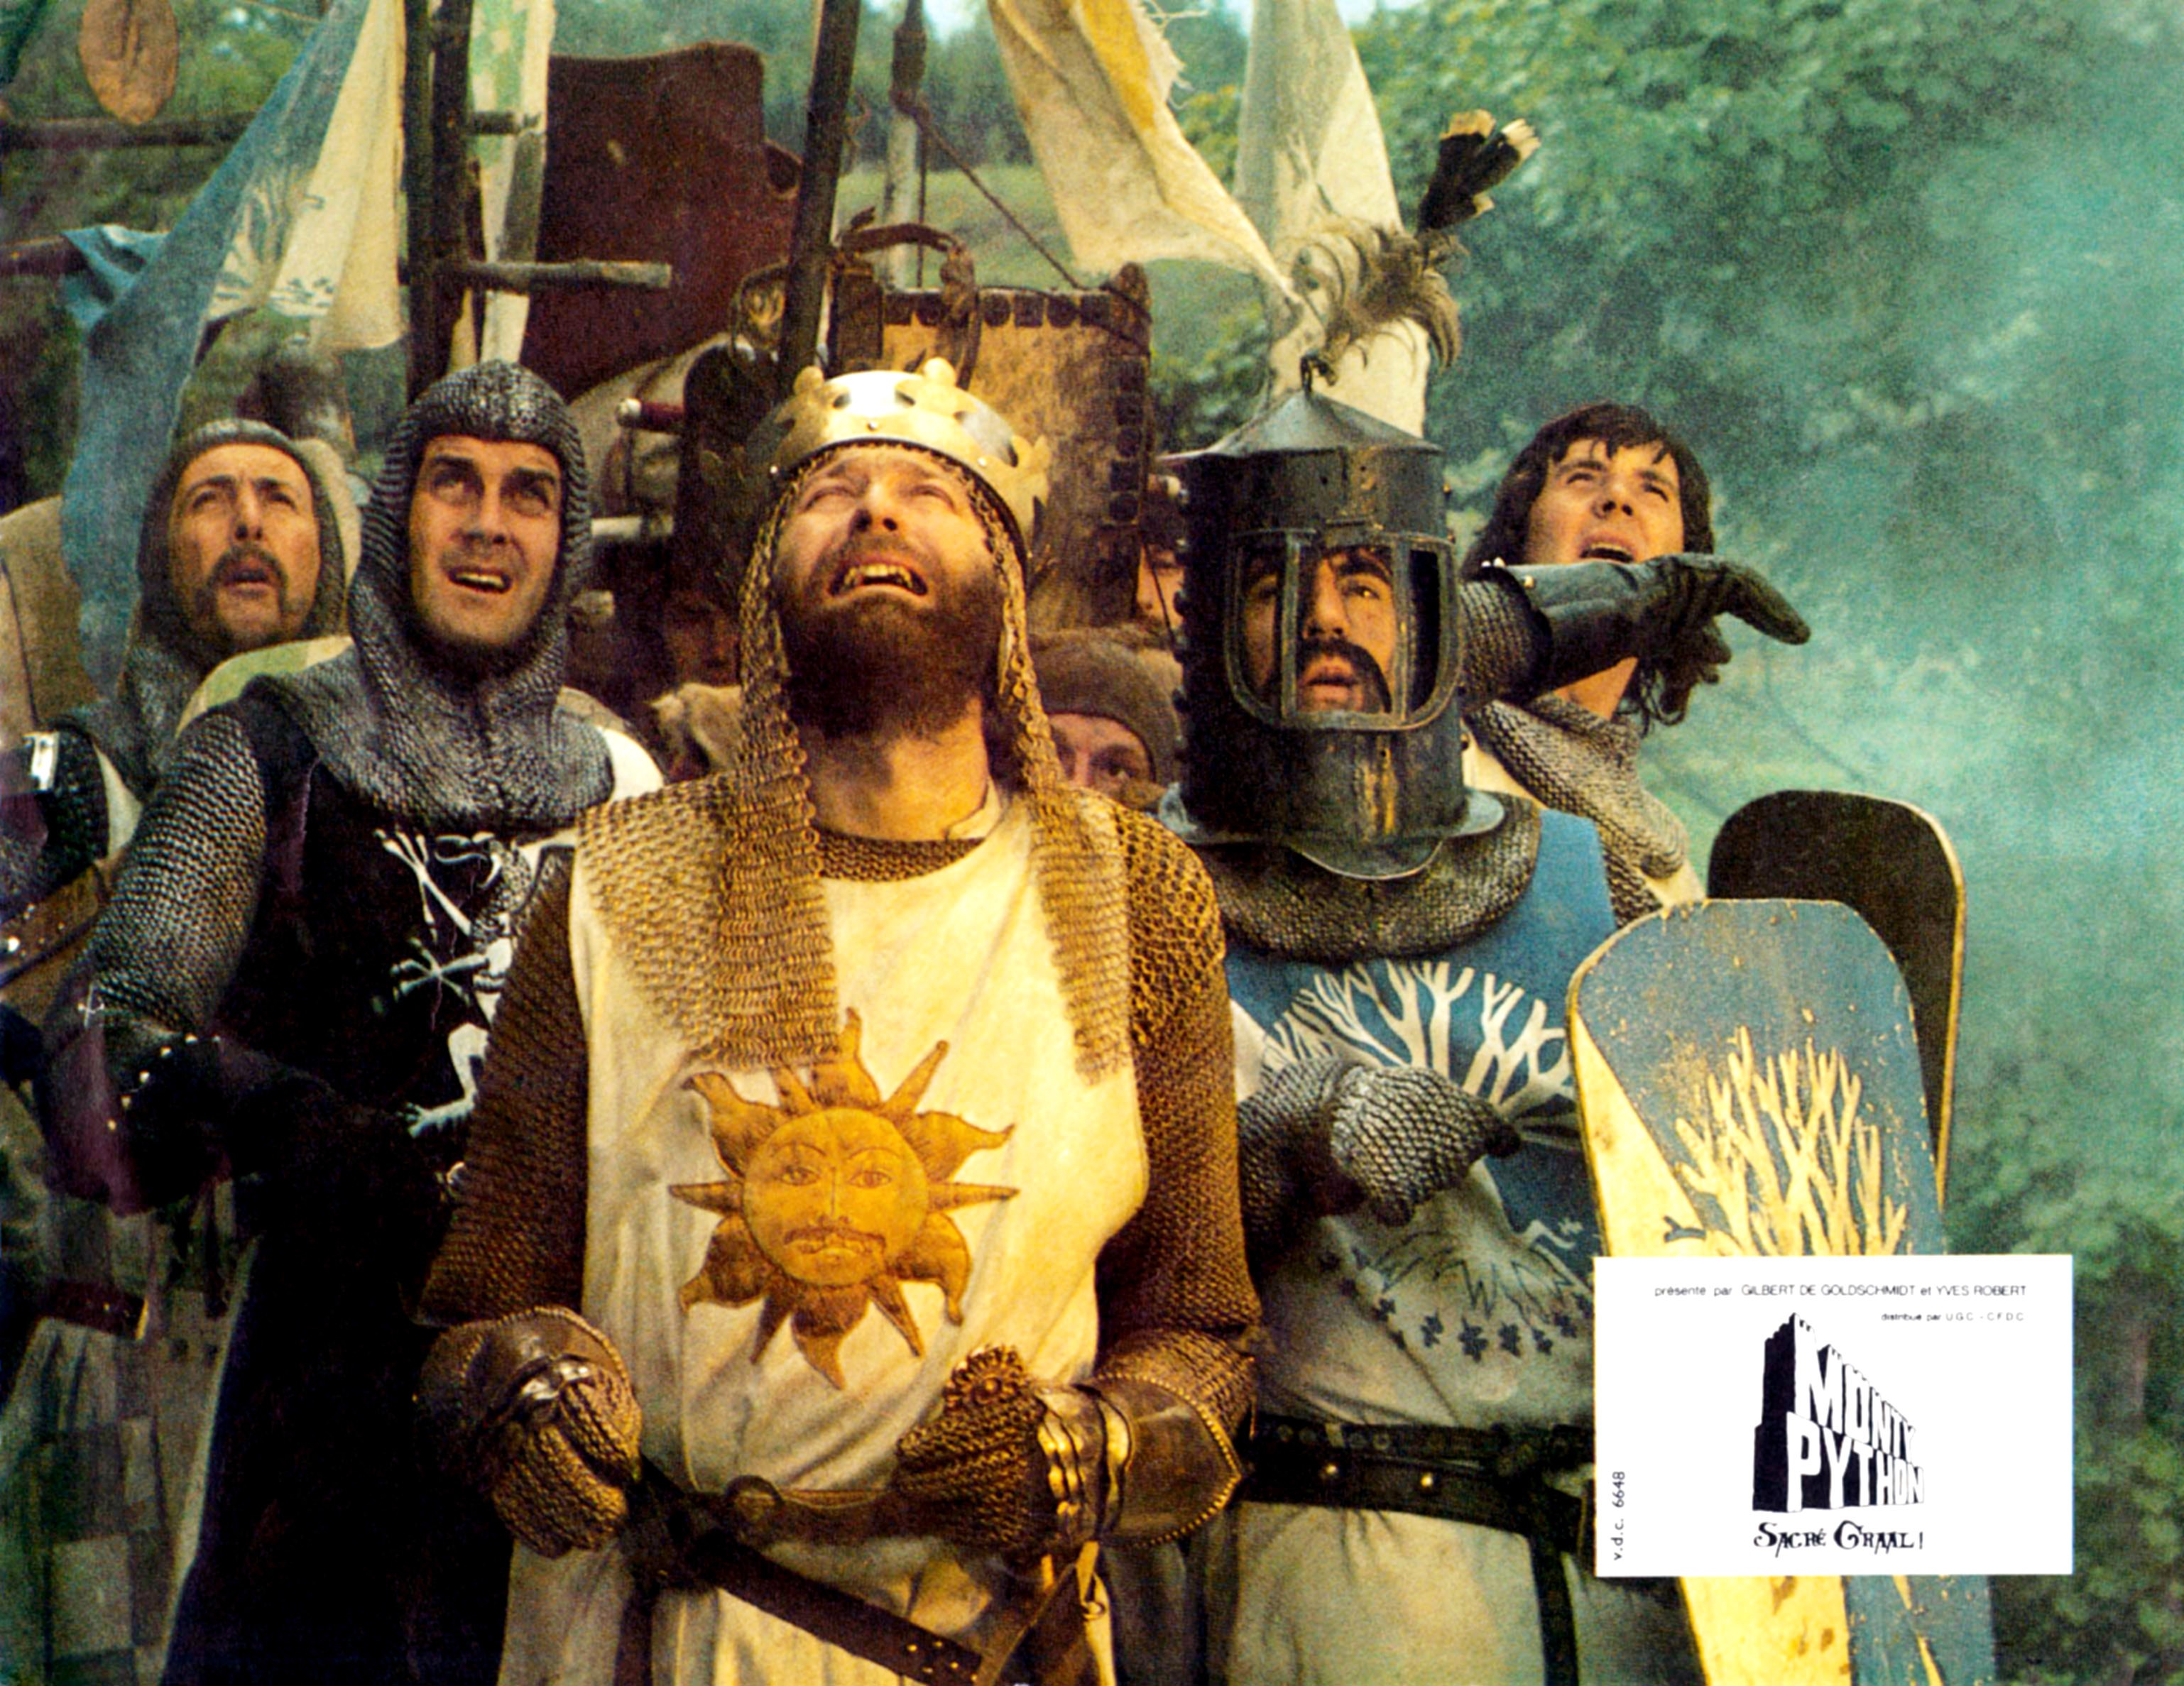 Monty Python And The Holy Grail (rear from left) Eric Idle, Michael Palin, (center from left) John Cleese, Terry Jones (helmet), Graham Chapman as King Arthur (front).